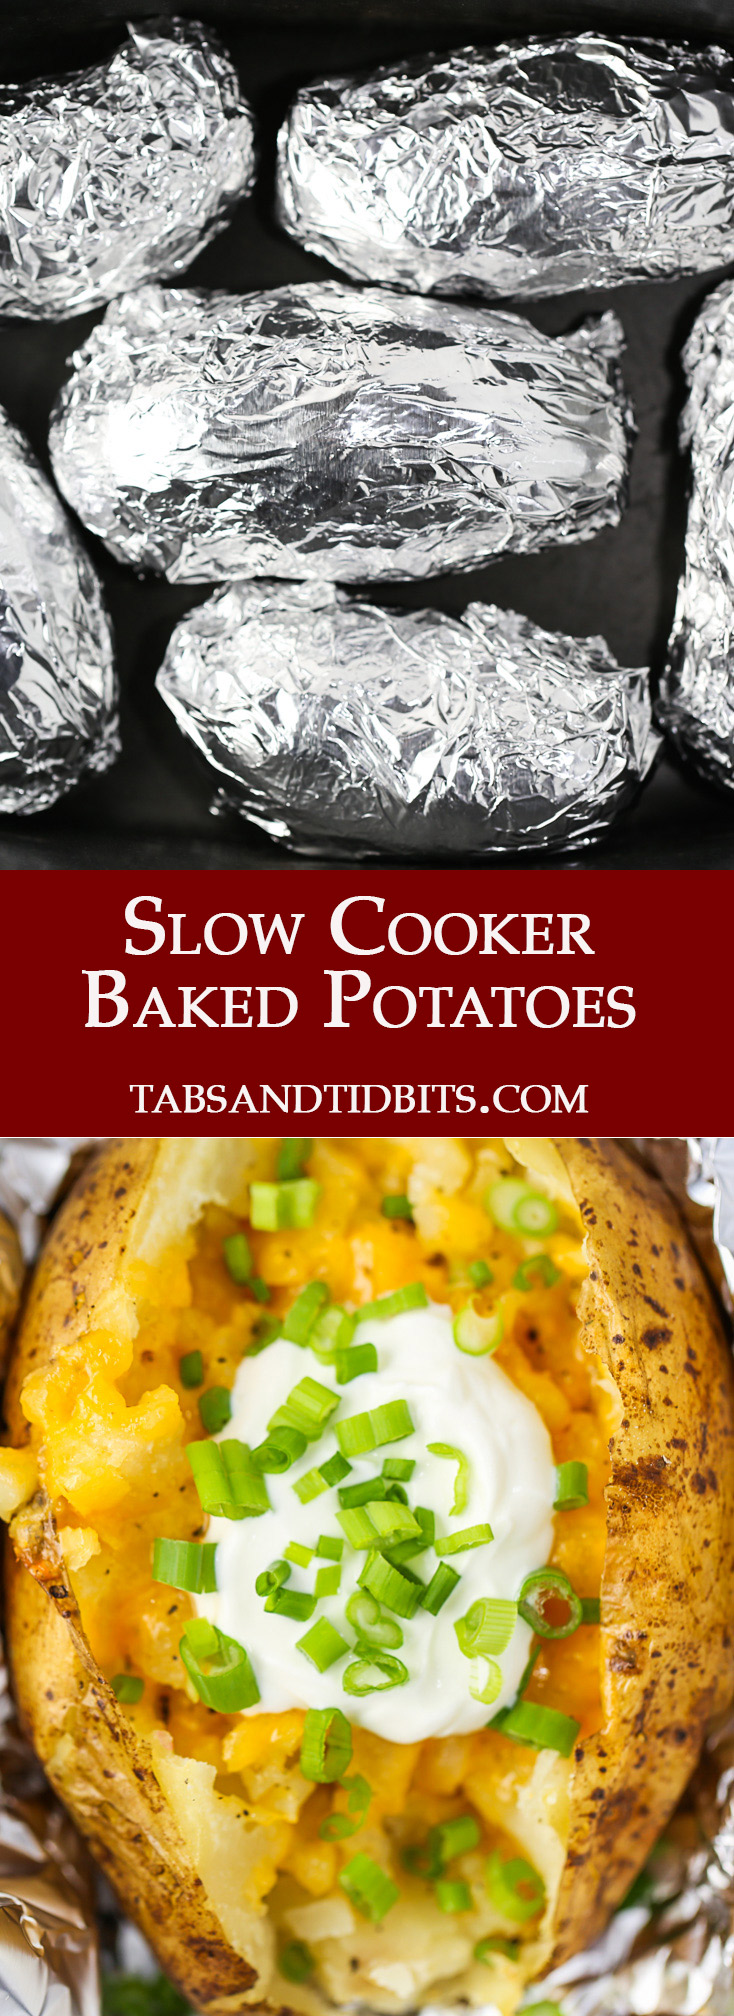 Slow Cooker Baked Potatoes are an inventive way to prepare the perfectly soft potato! 